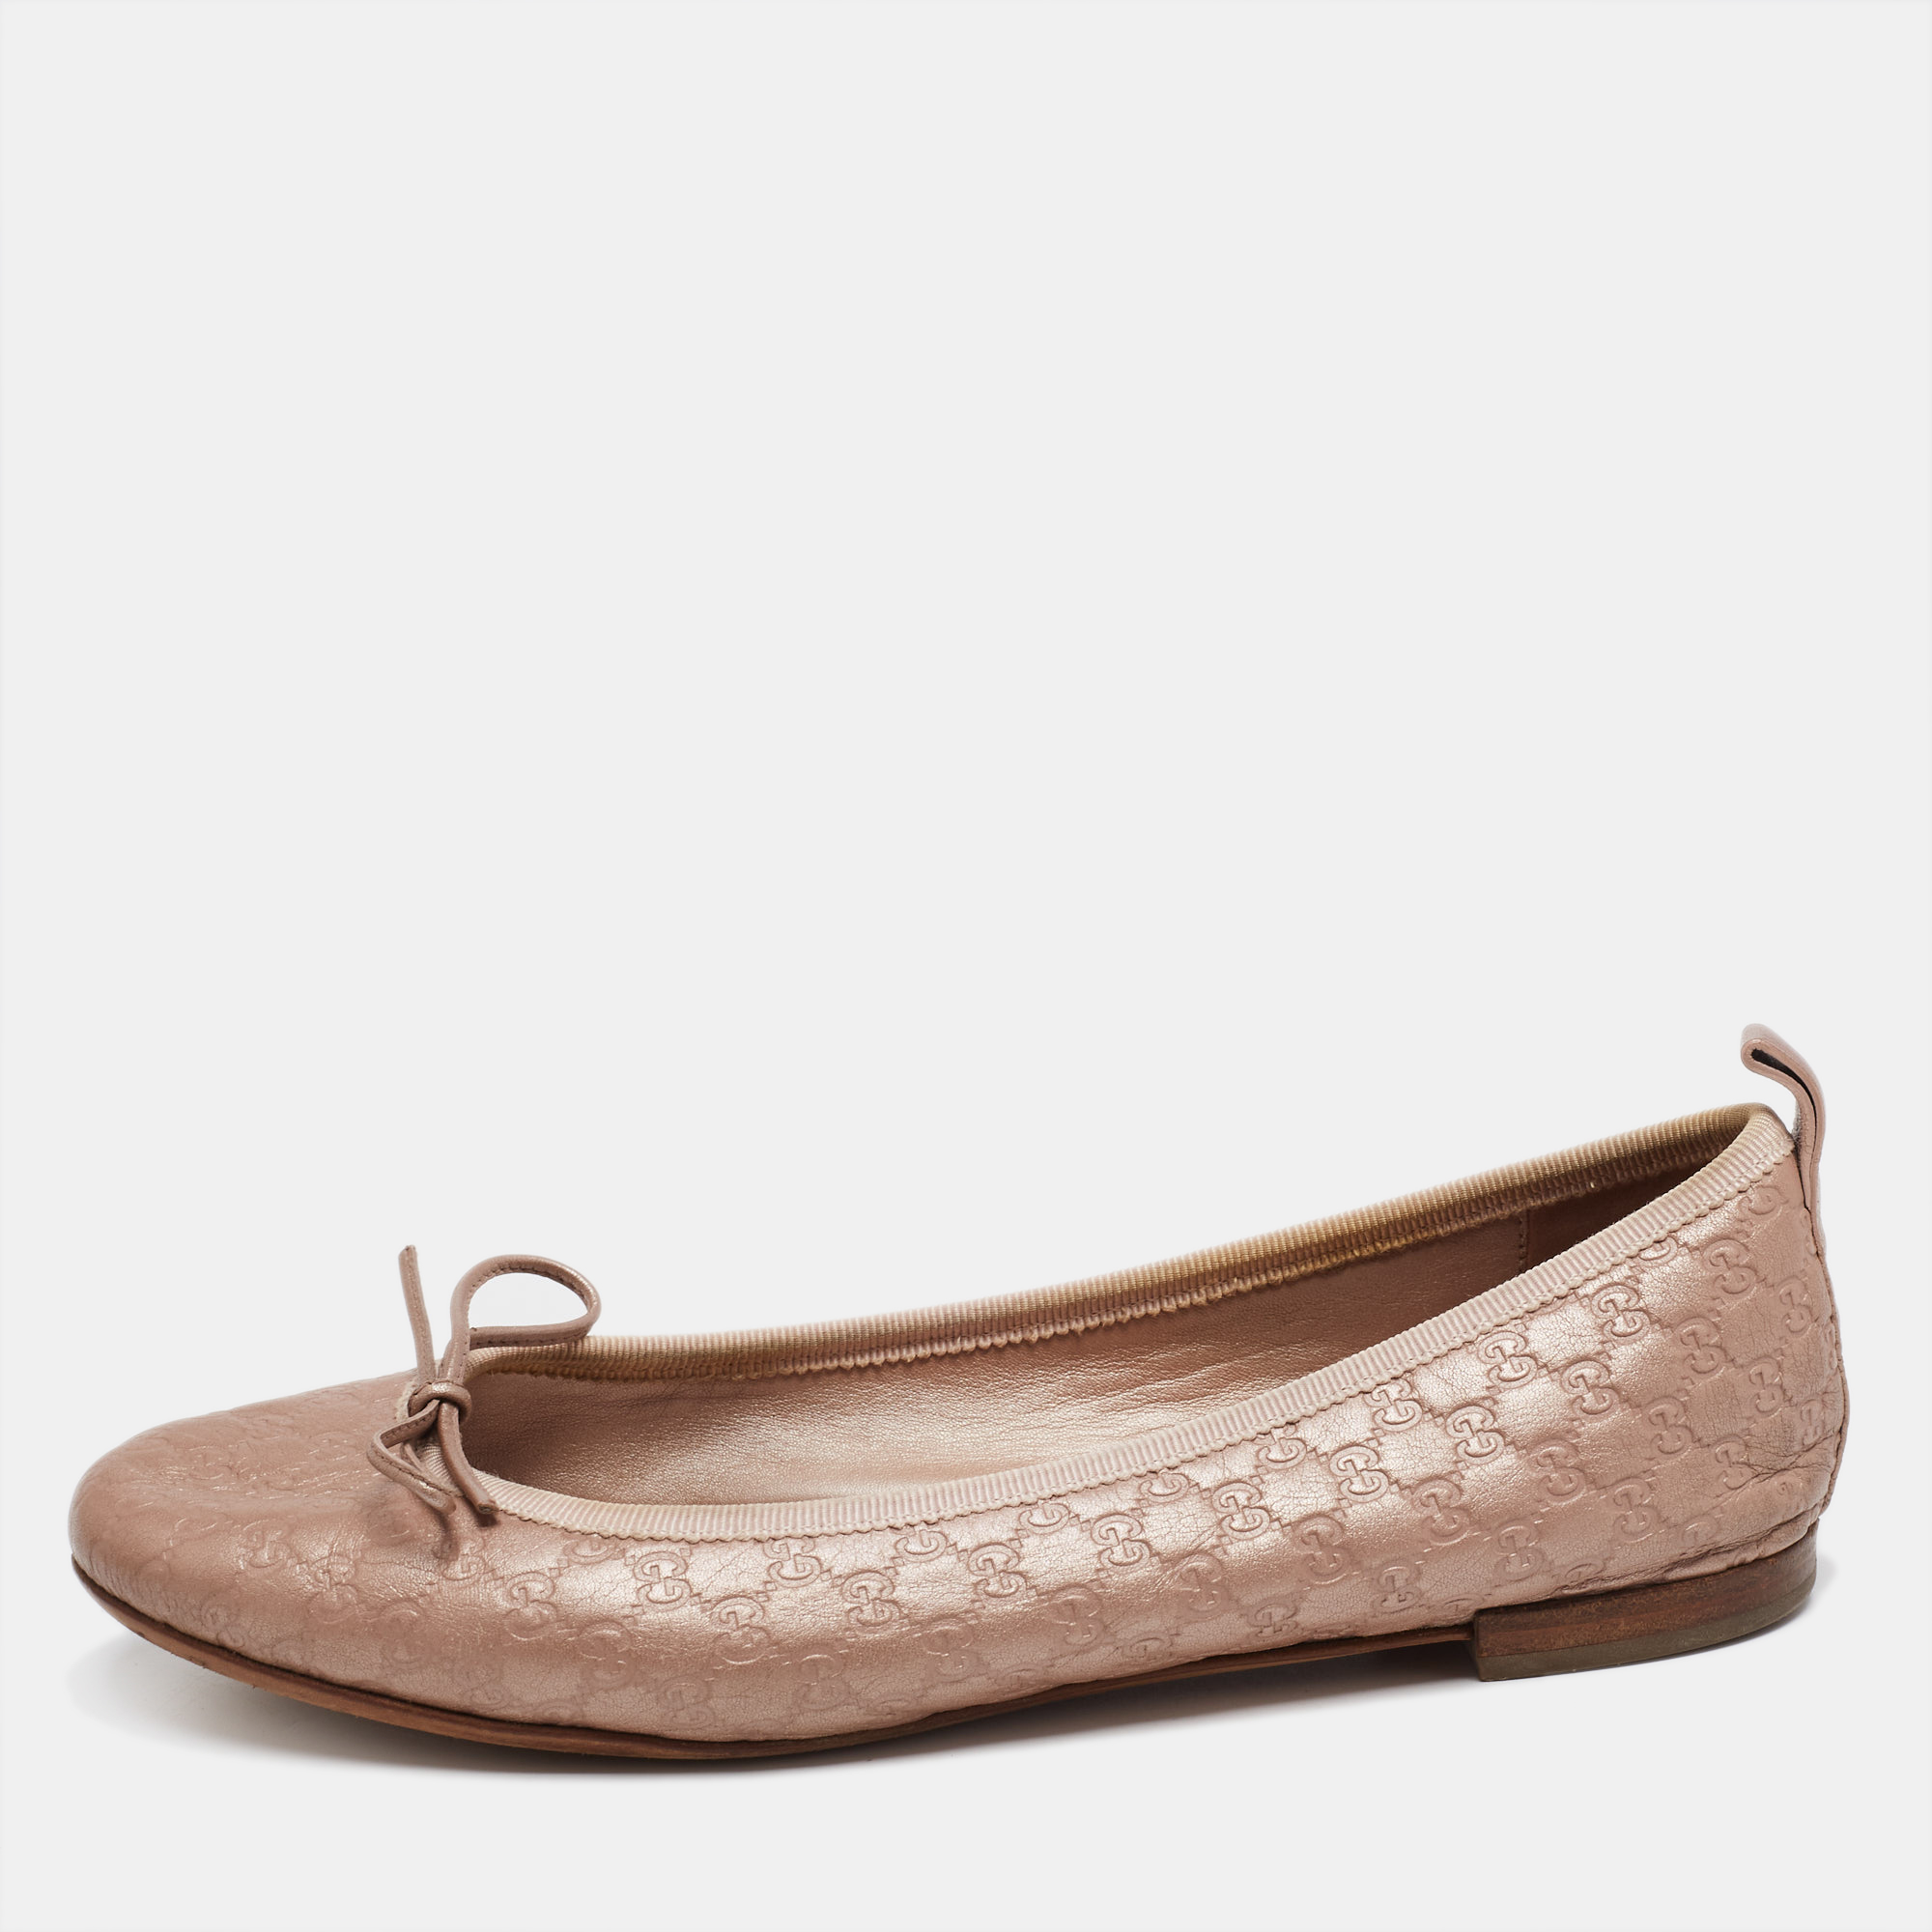 Gucci metallic rose gold  guccissima  leather bow detail ballet flats size 35